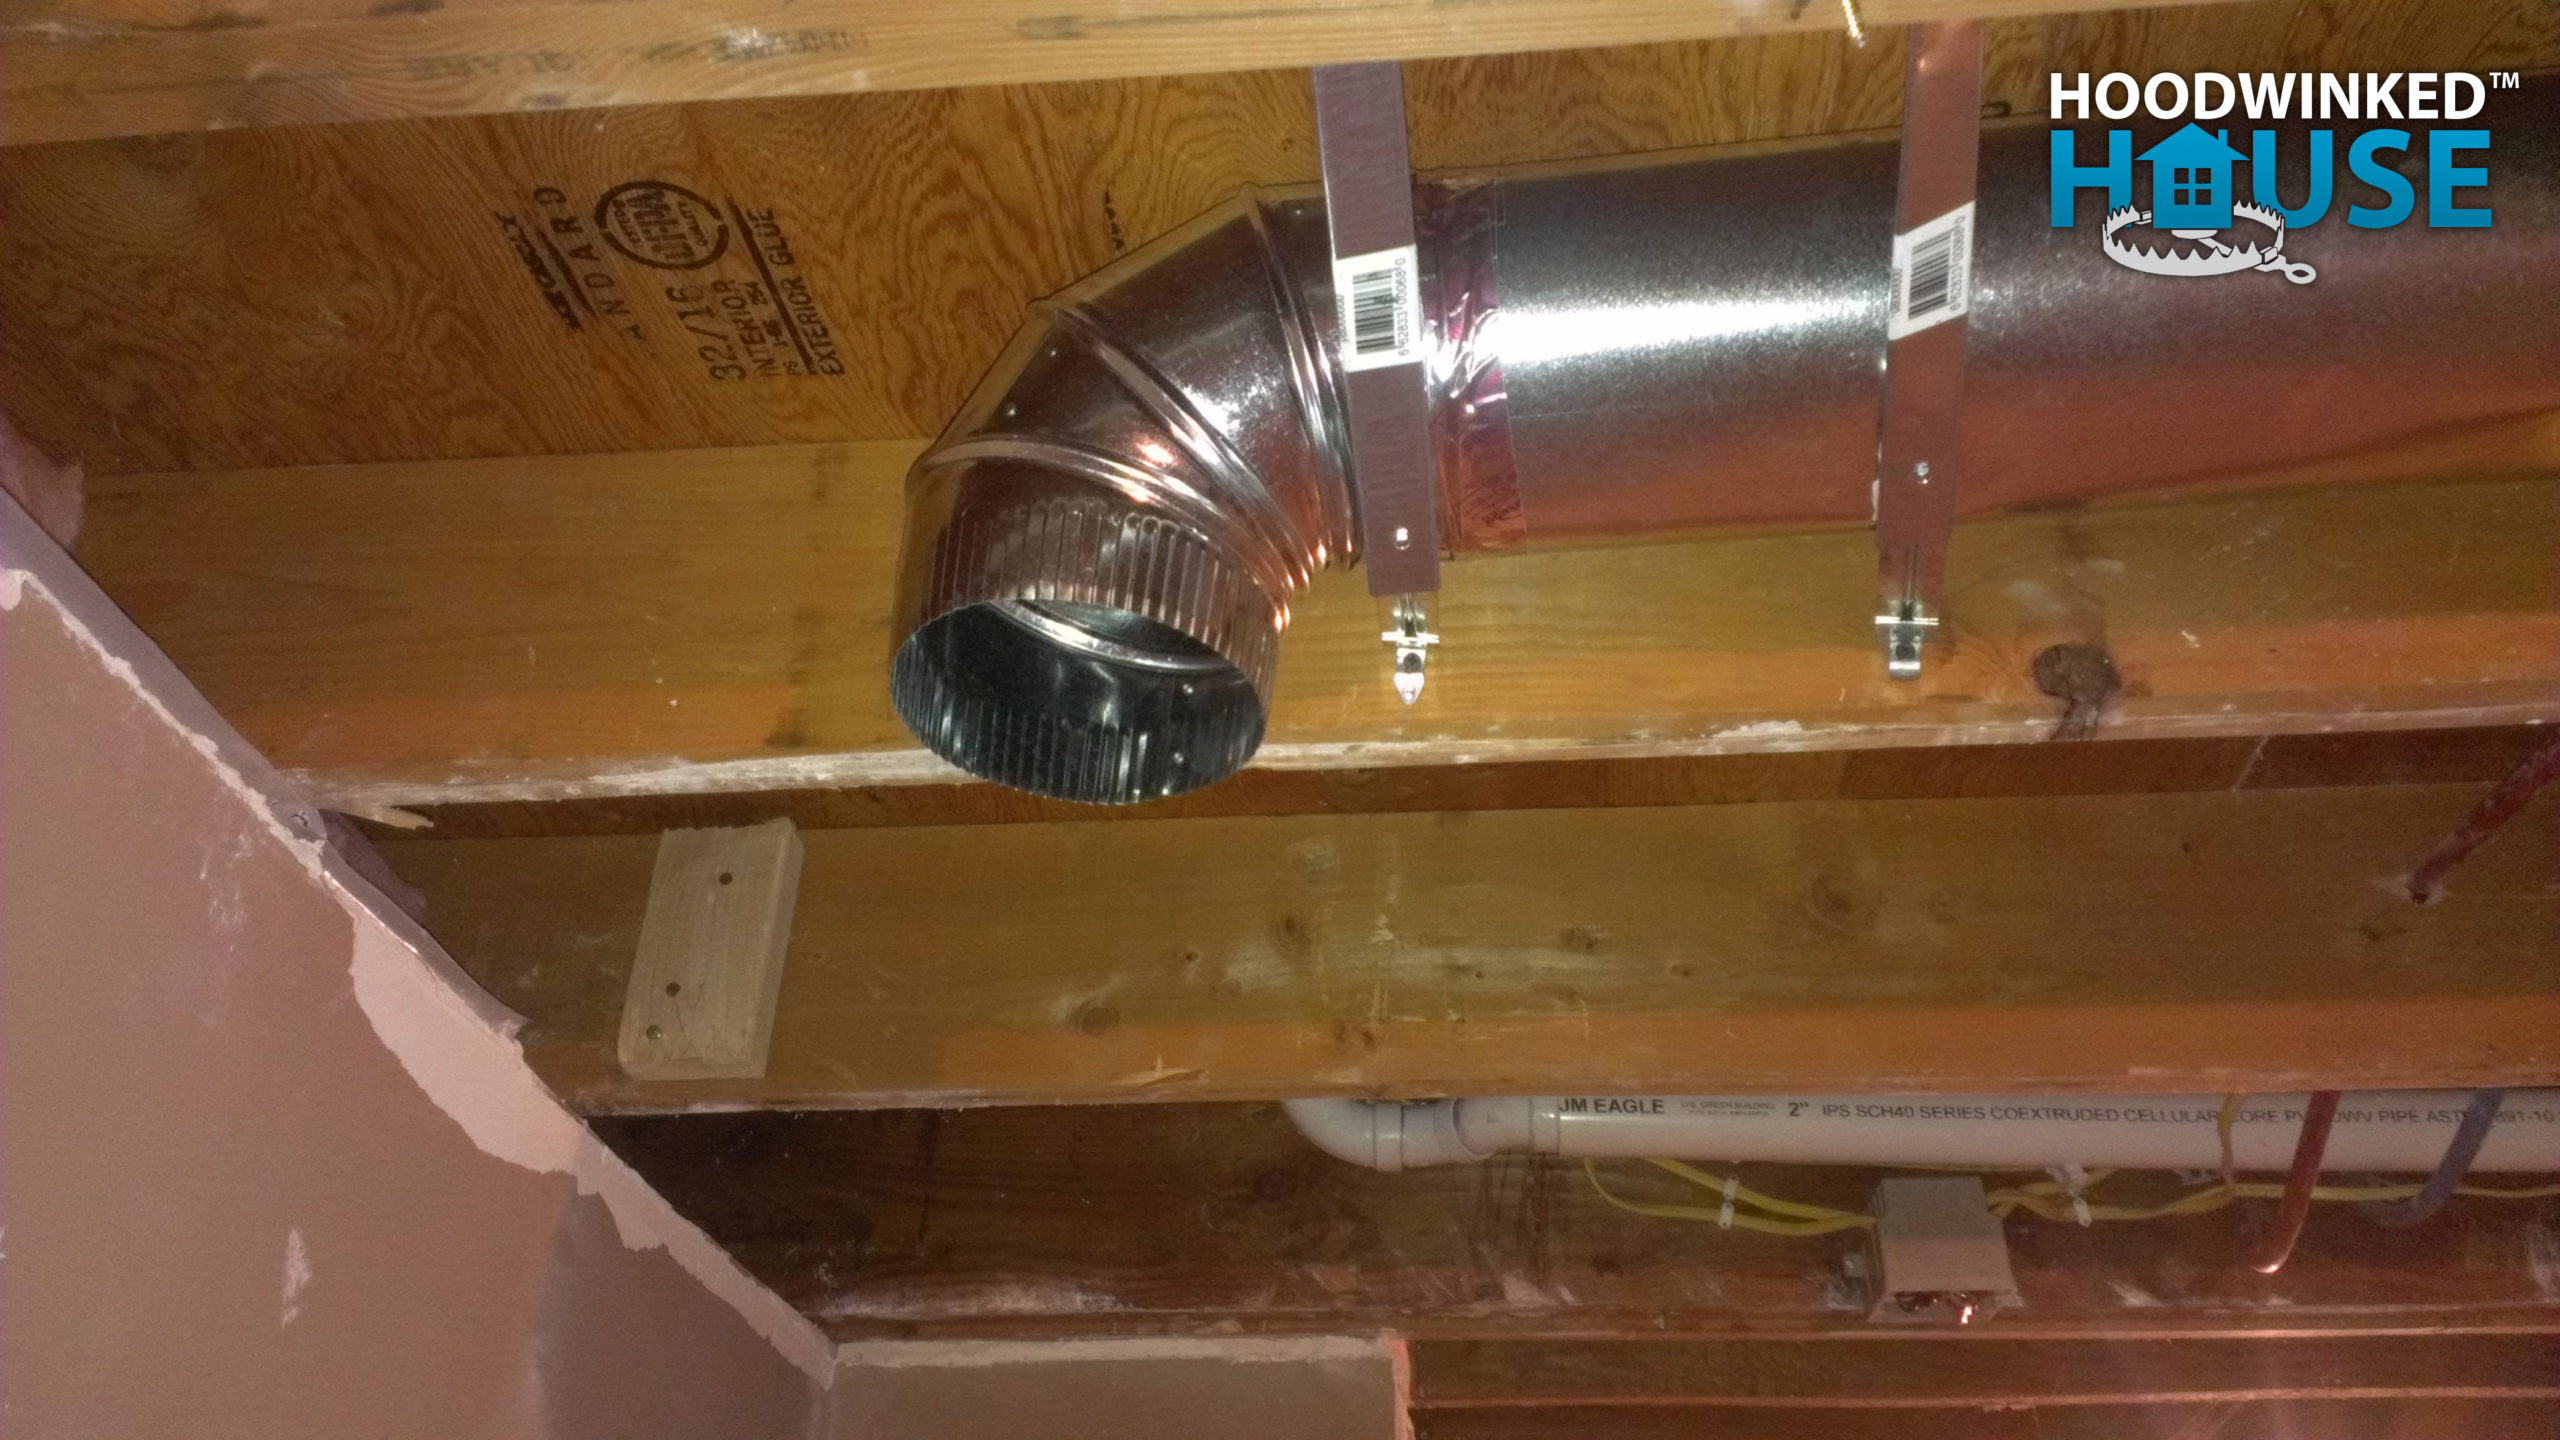 An basement ceiling air duct branch ends in an elbow.